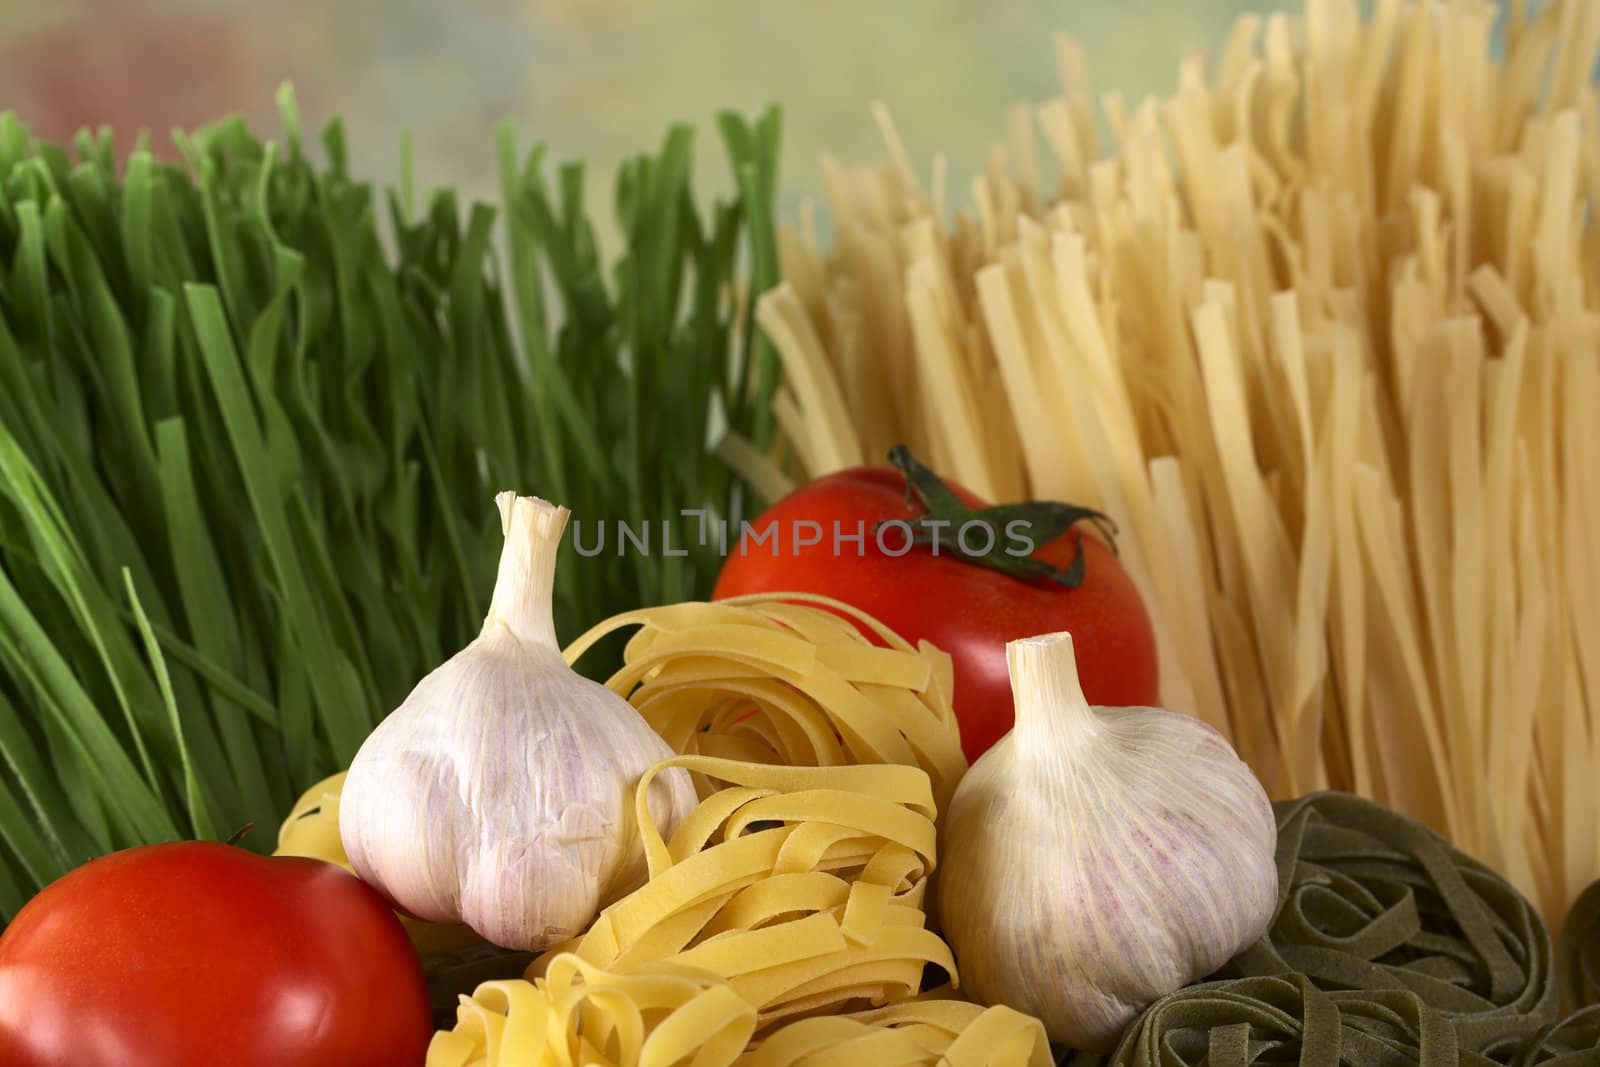 Raw tagliatelle paglia e fieno (straw and hay) with raw garlic bulbs and globe tomato (Selective Focus, Focus on the front of the garlic bulbs and the front of the yellow tagliatelle between them)